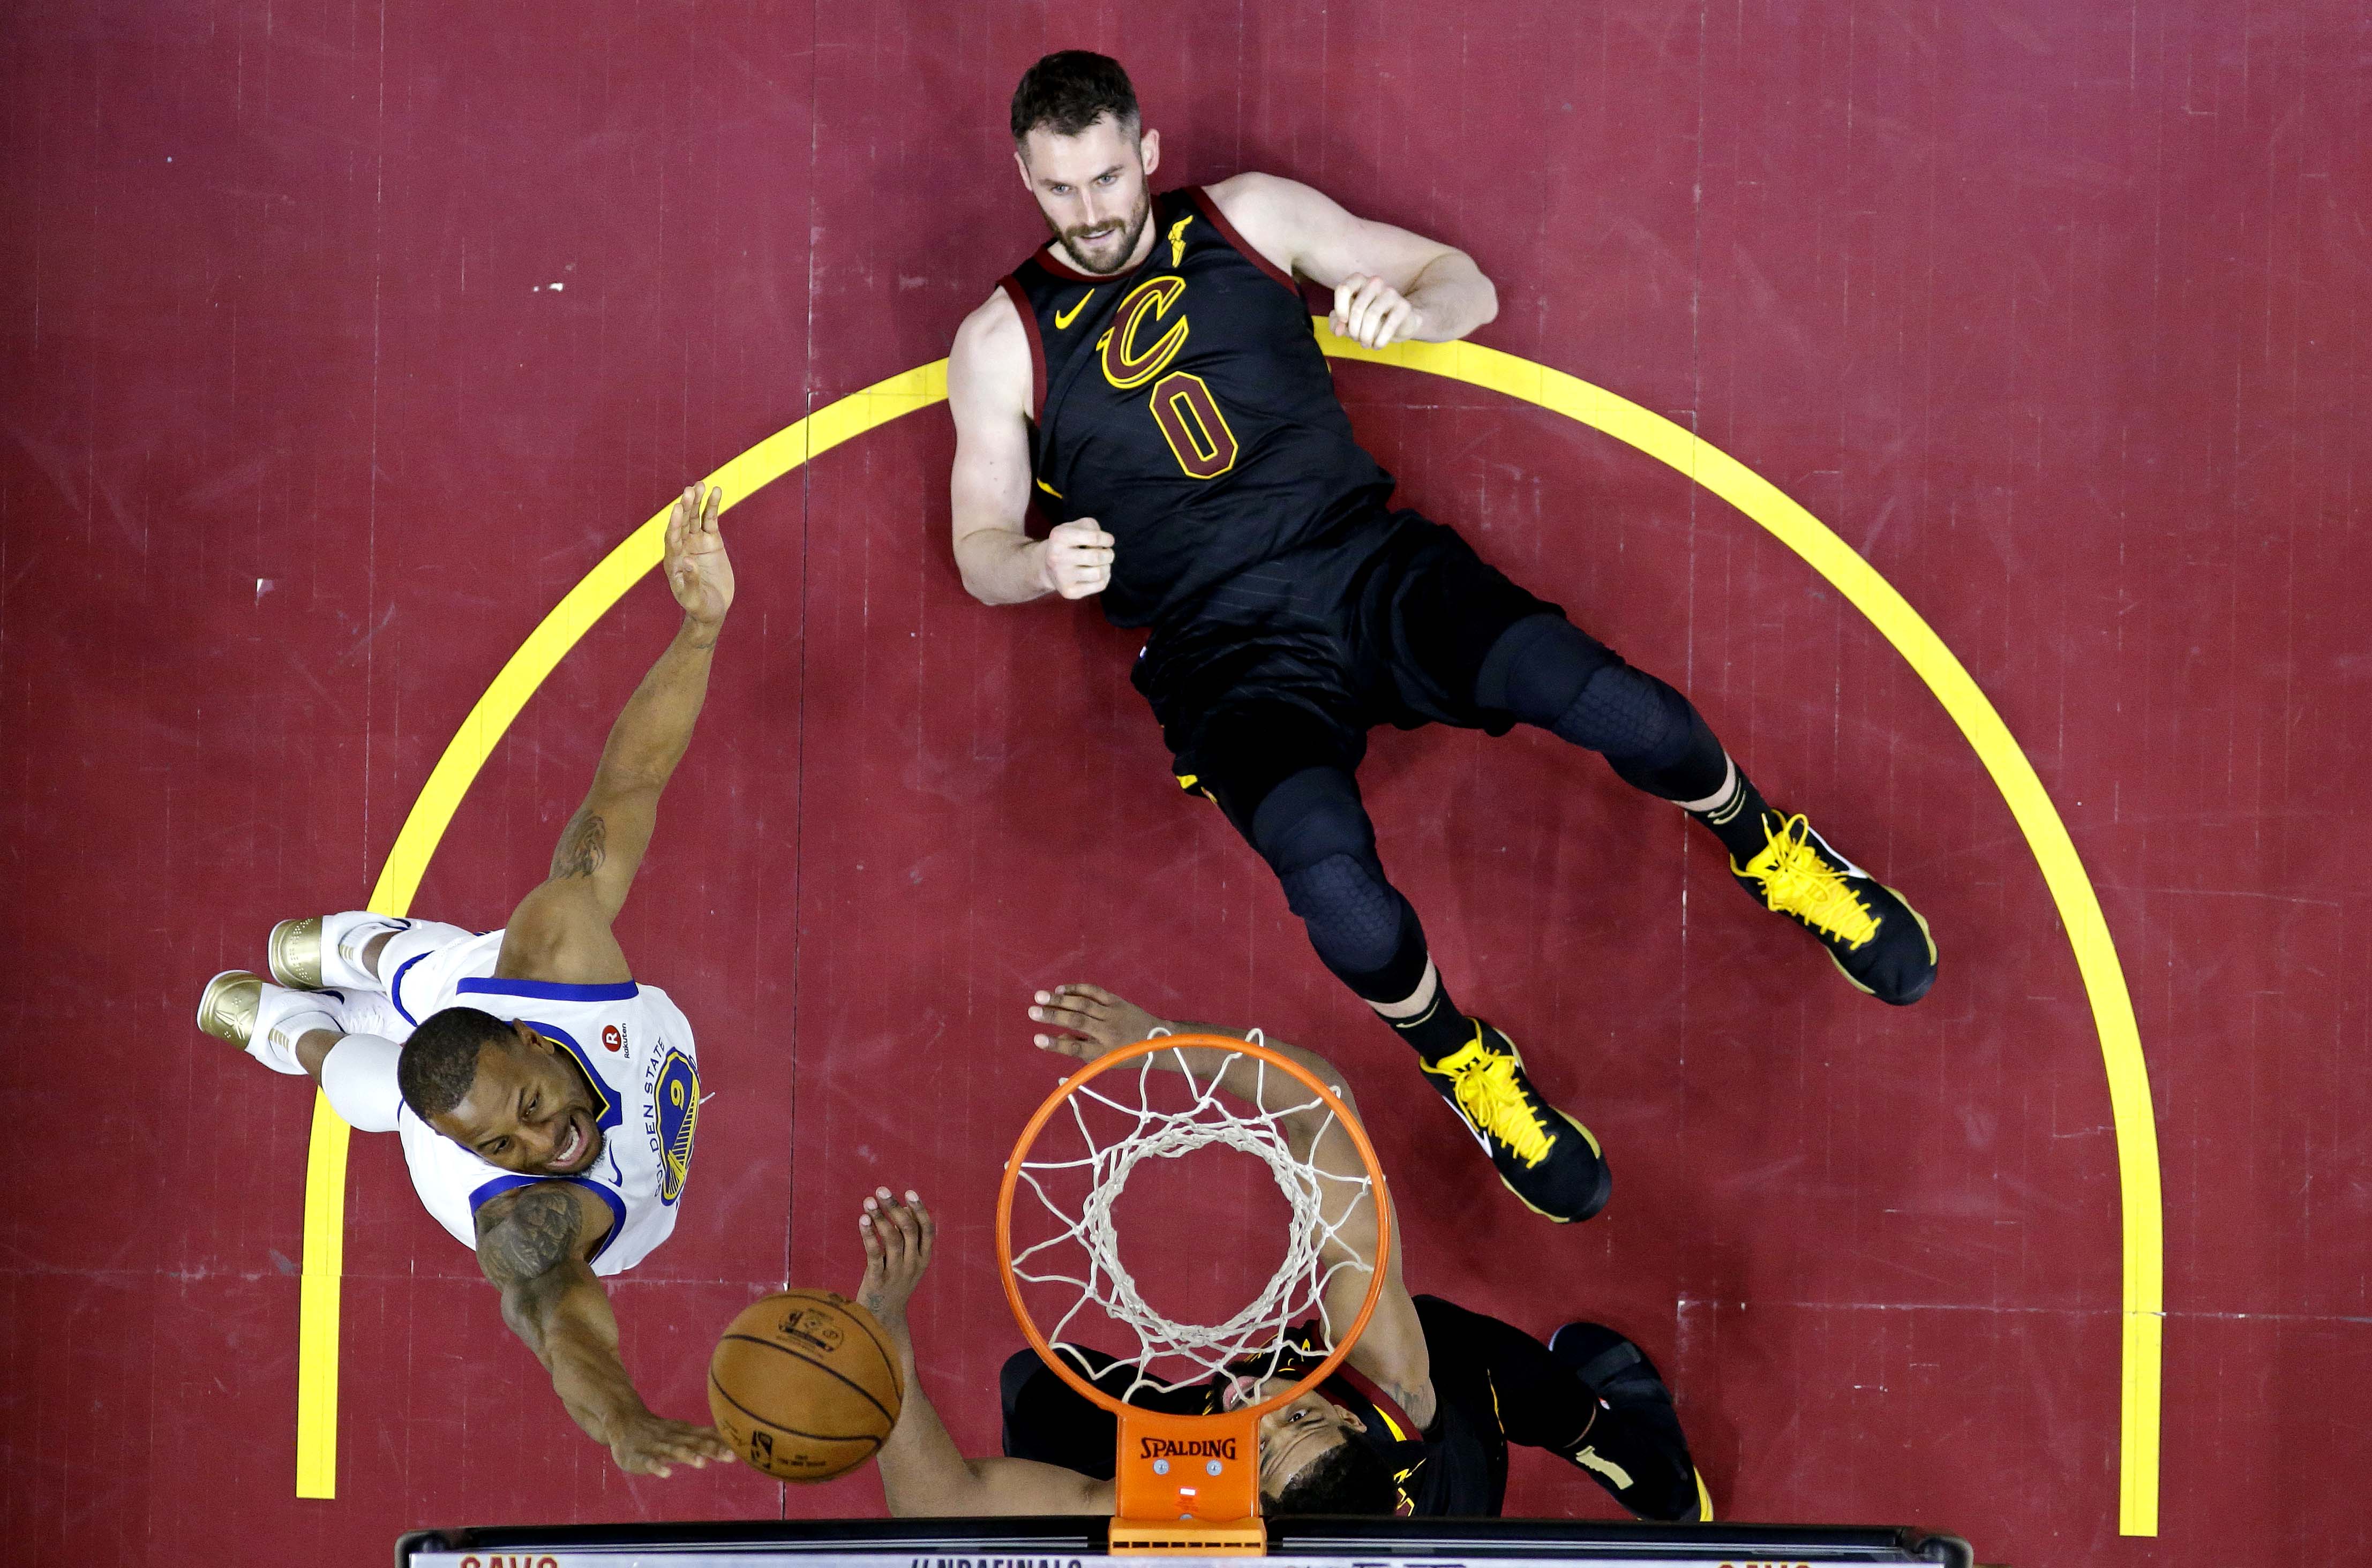 Cleveland Cavaliers center Kevin Love (on ground)—who wrote a story for The Players' Tribune revealing that, during a game, he had had a panic attack—during the fourth quarter in game three of the 2018 NBA Finals at Quicken Loans Arena